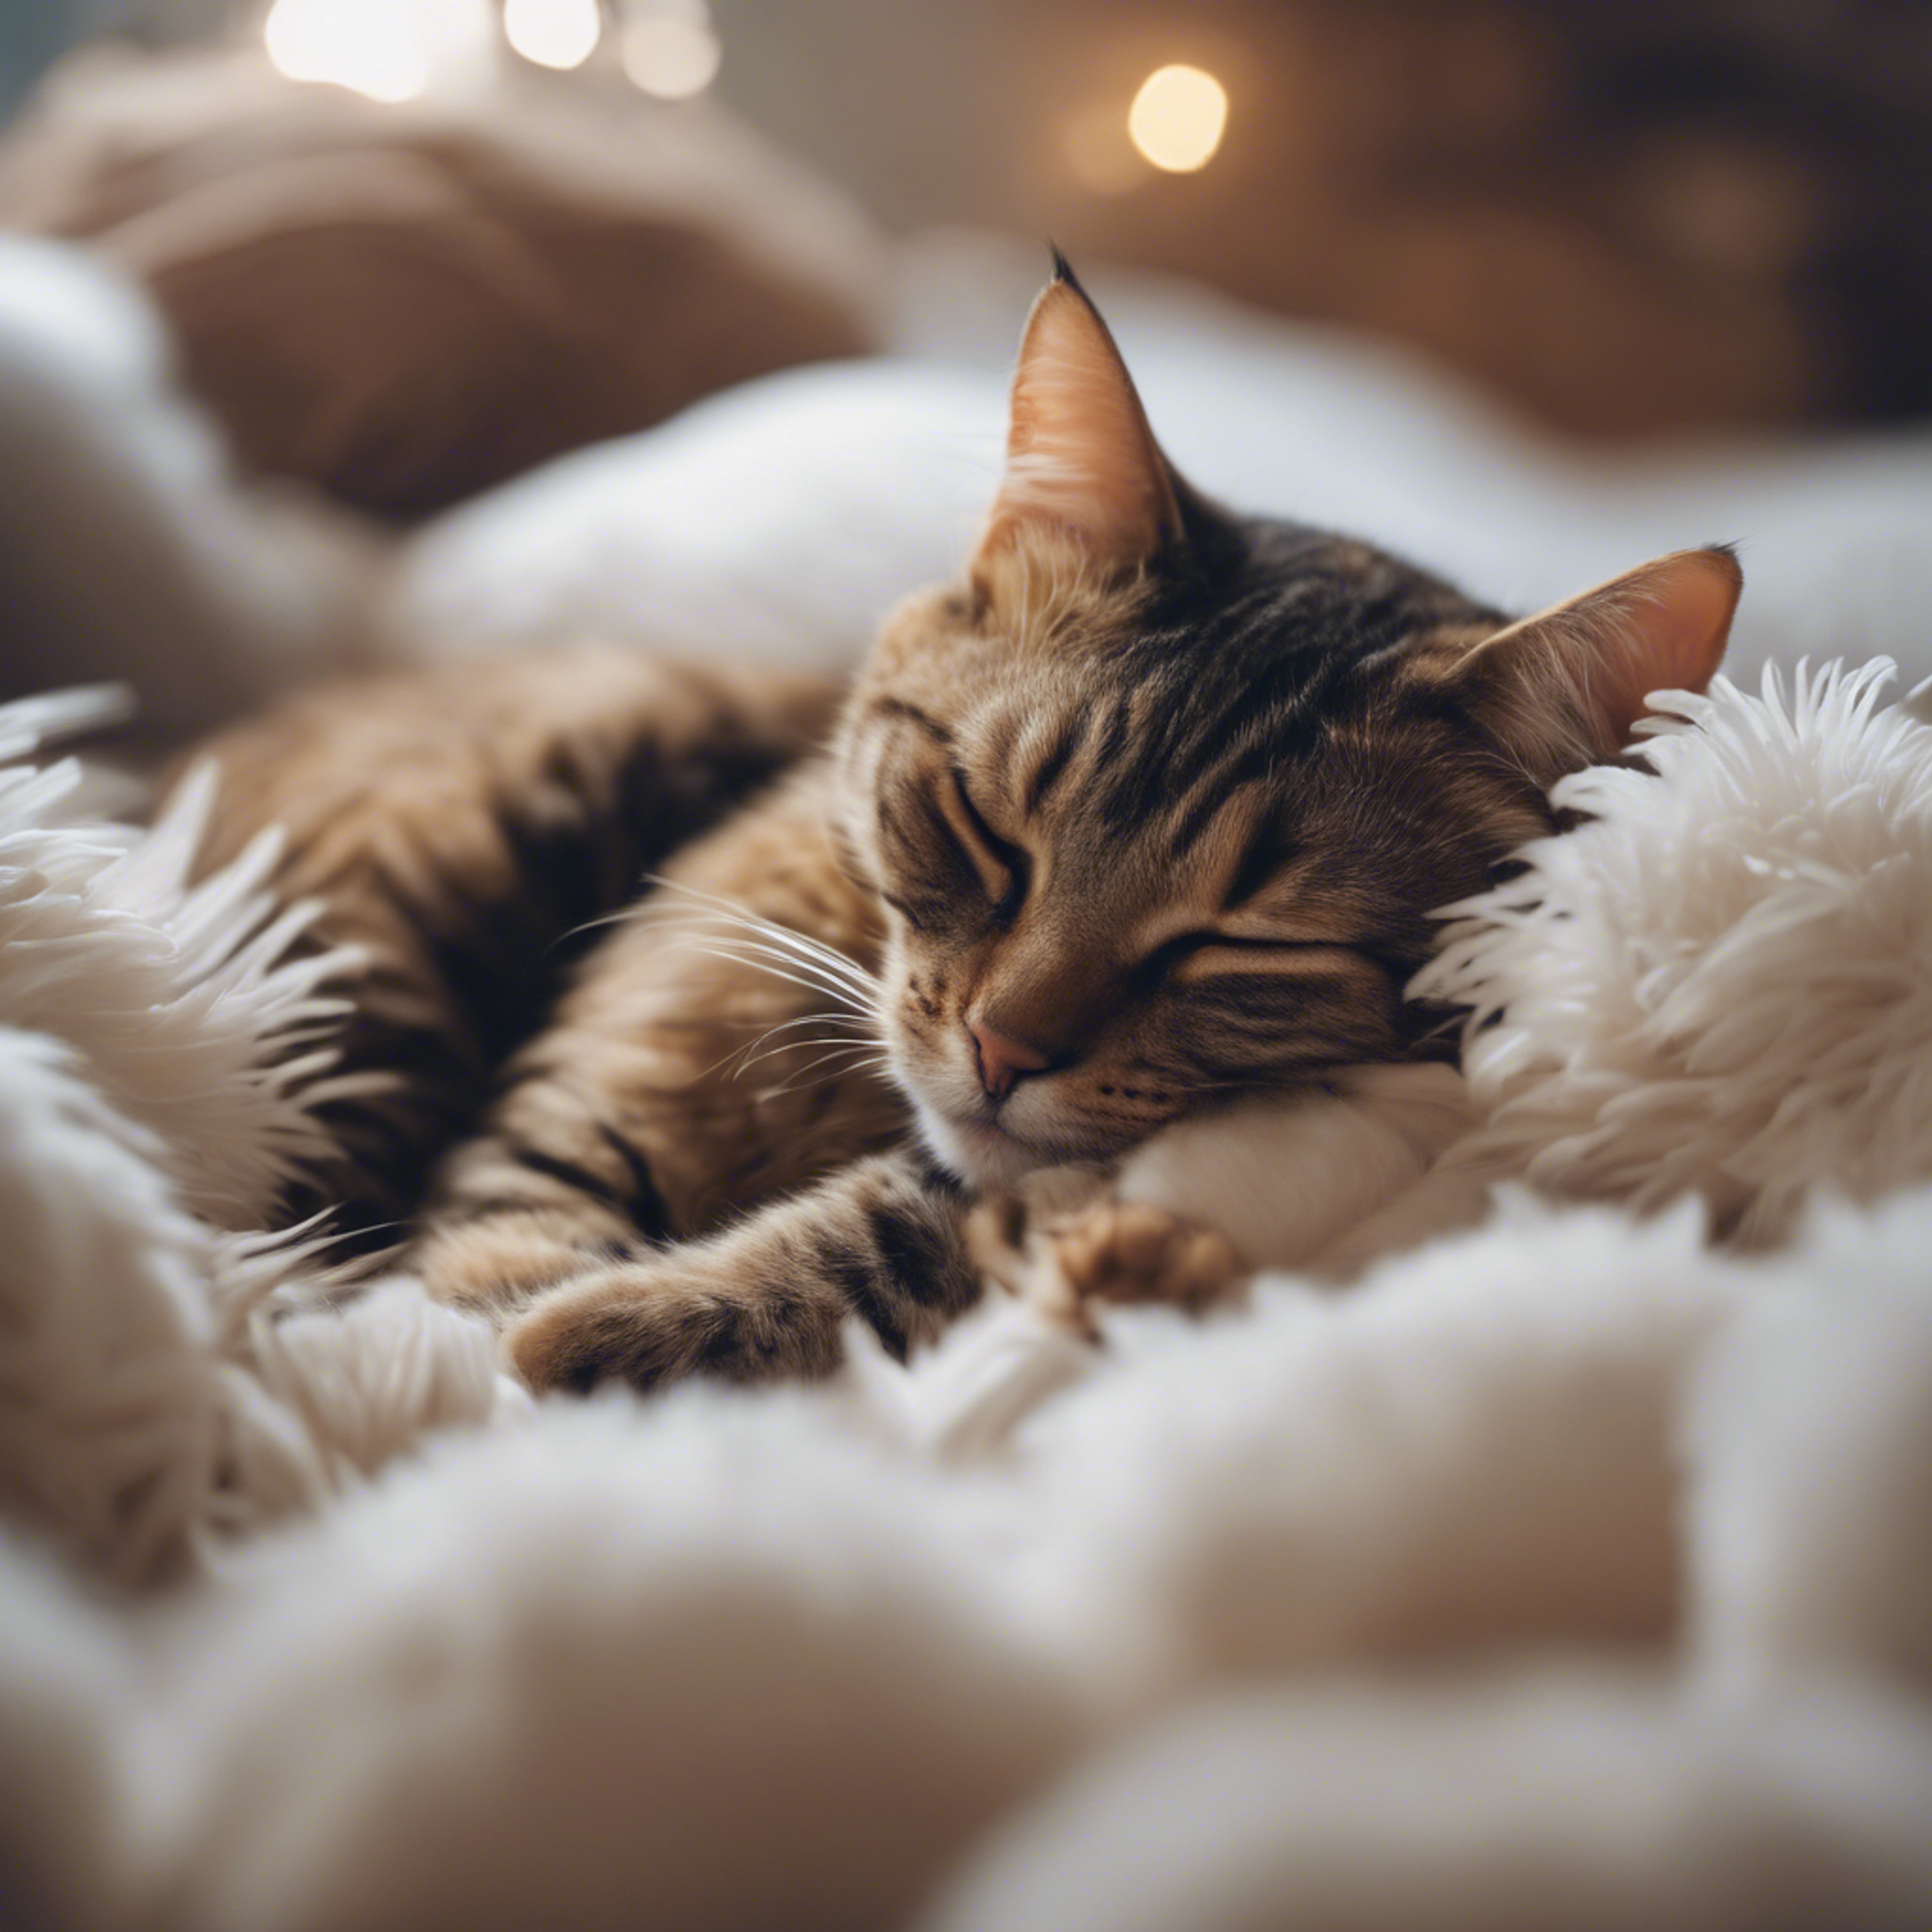 A cat sleeping soundly, completely submerged in a sea of cozy, fluffy pillows. Tapeta[9e78fe4df88a4e90bb06]